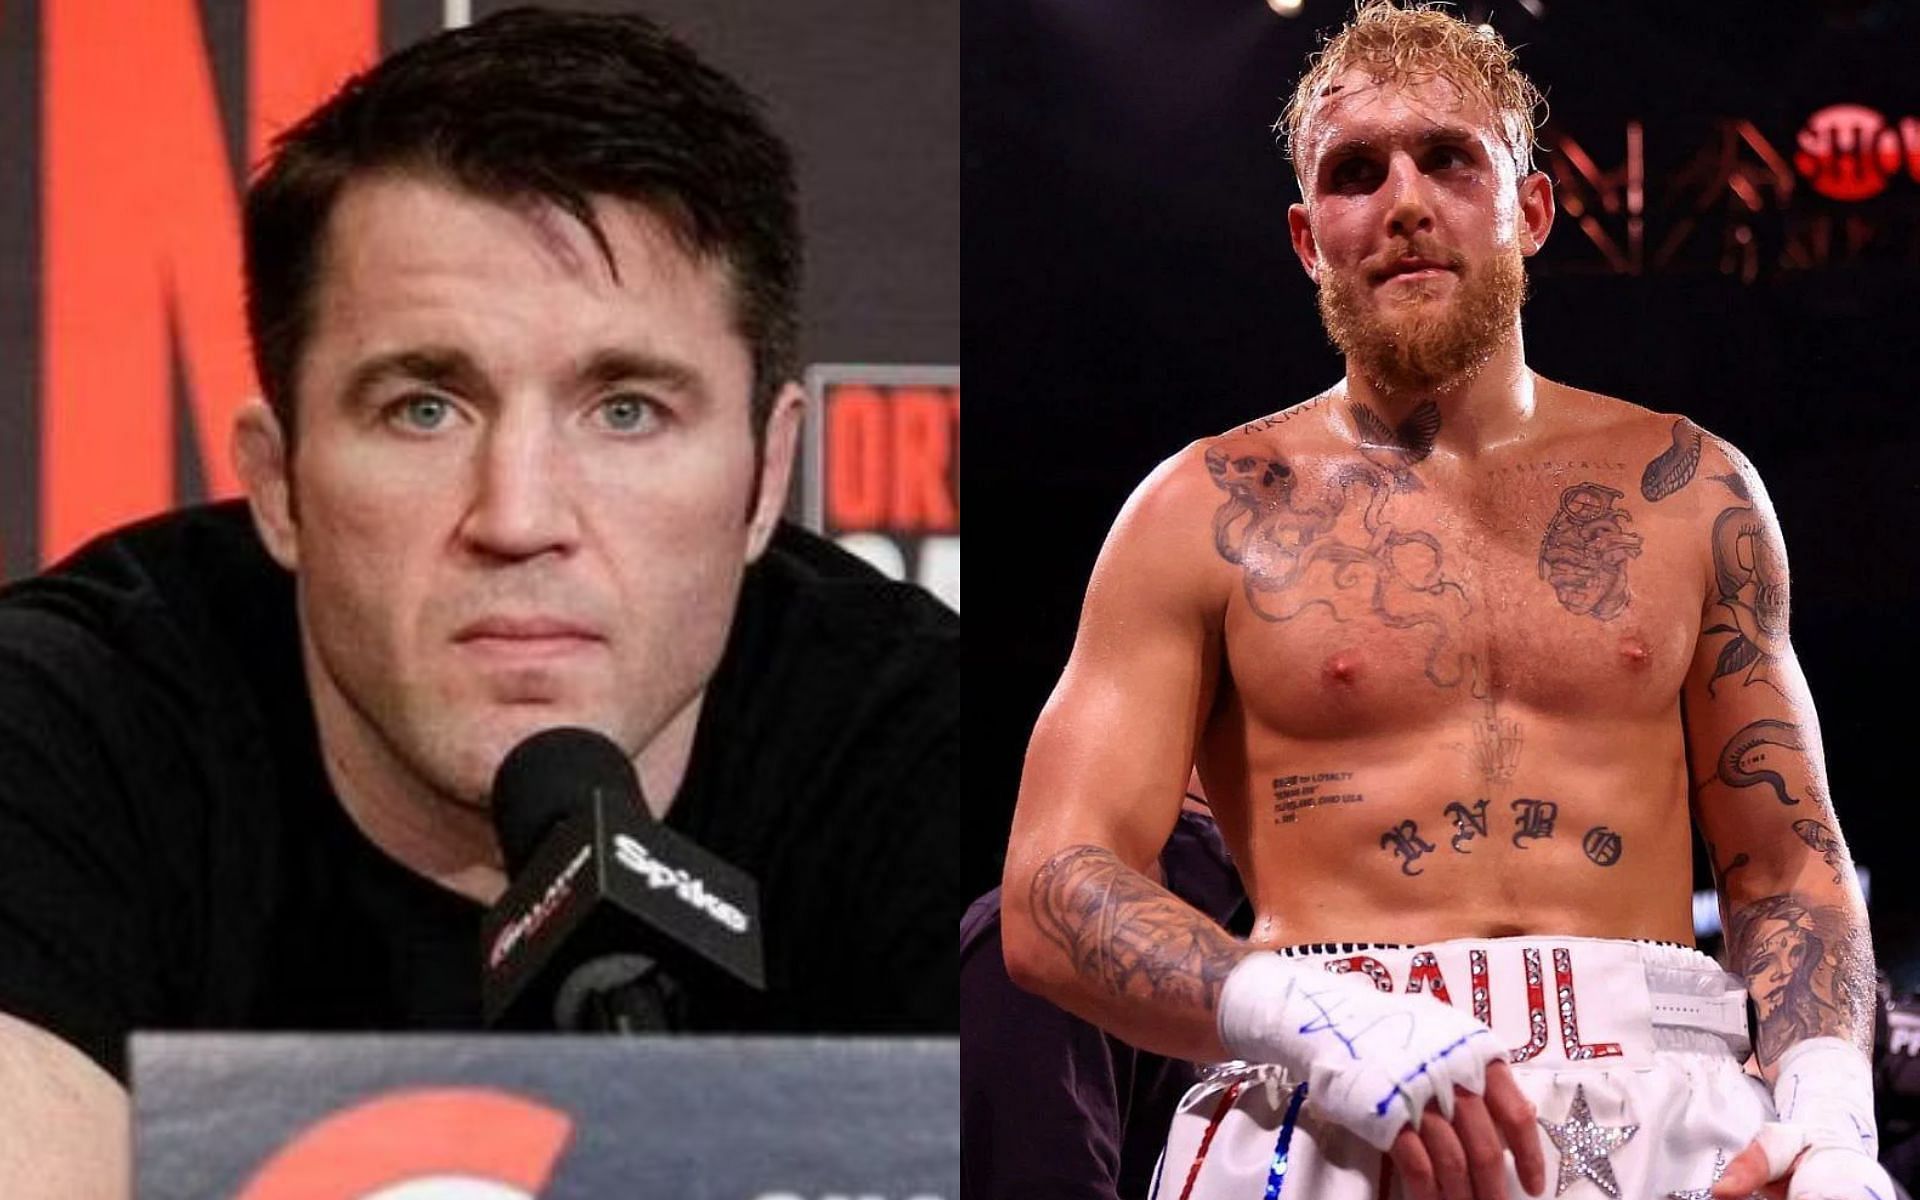 Chael Sonnen (left) and Jake Paul (right)